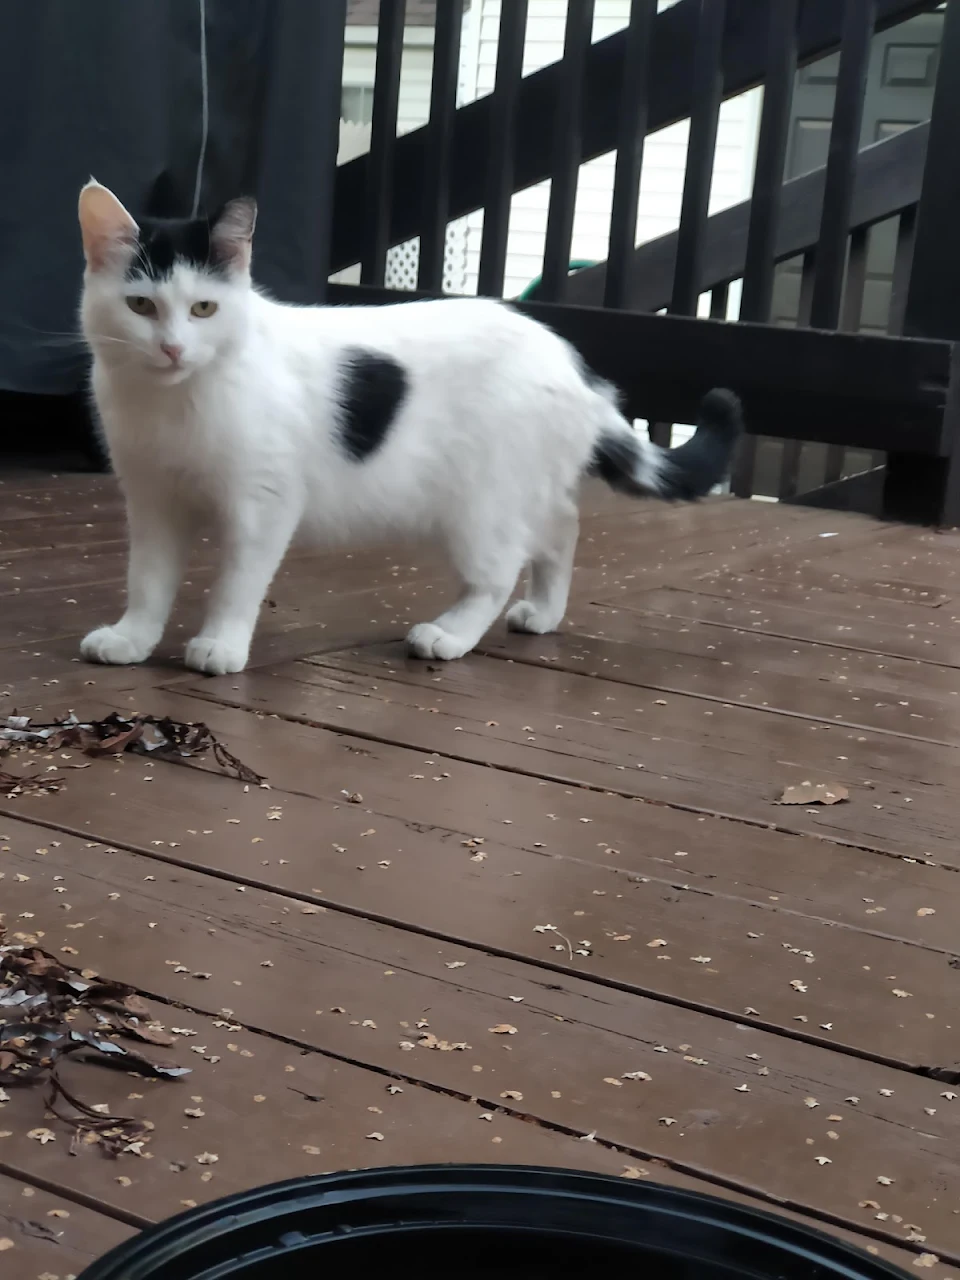 This cutie's been coming to my house a lot. It has a clipped ear, and I've heard that might mean it's a stray that's been caught, fixed and released. Is that pretty standard?